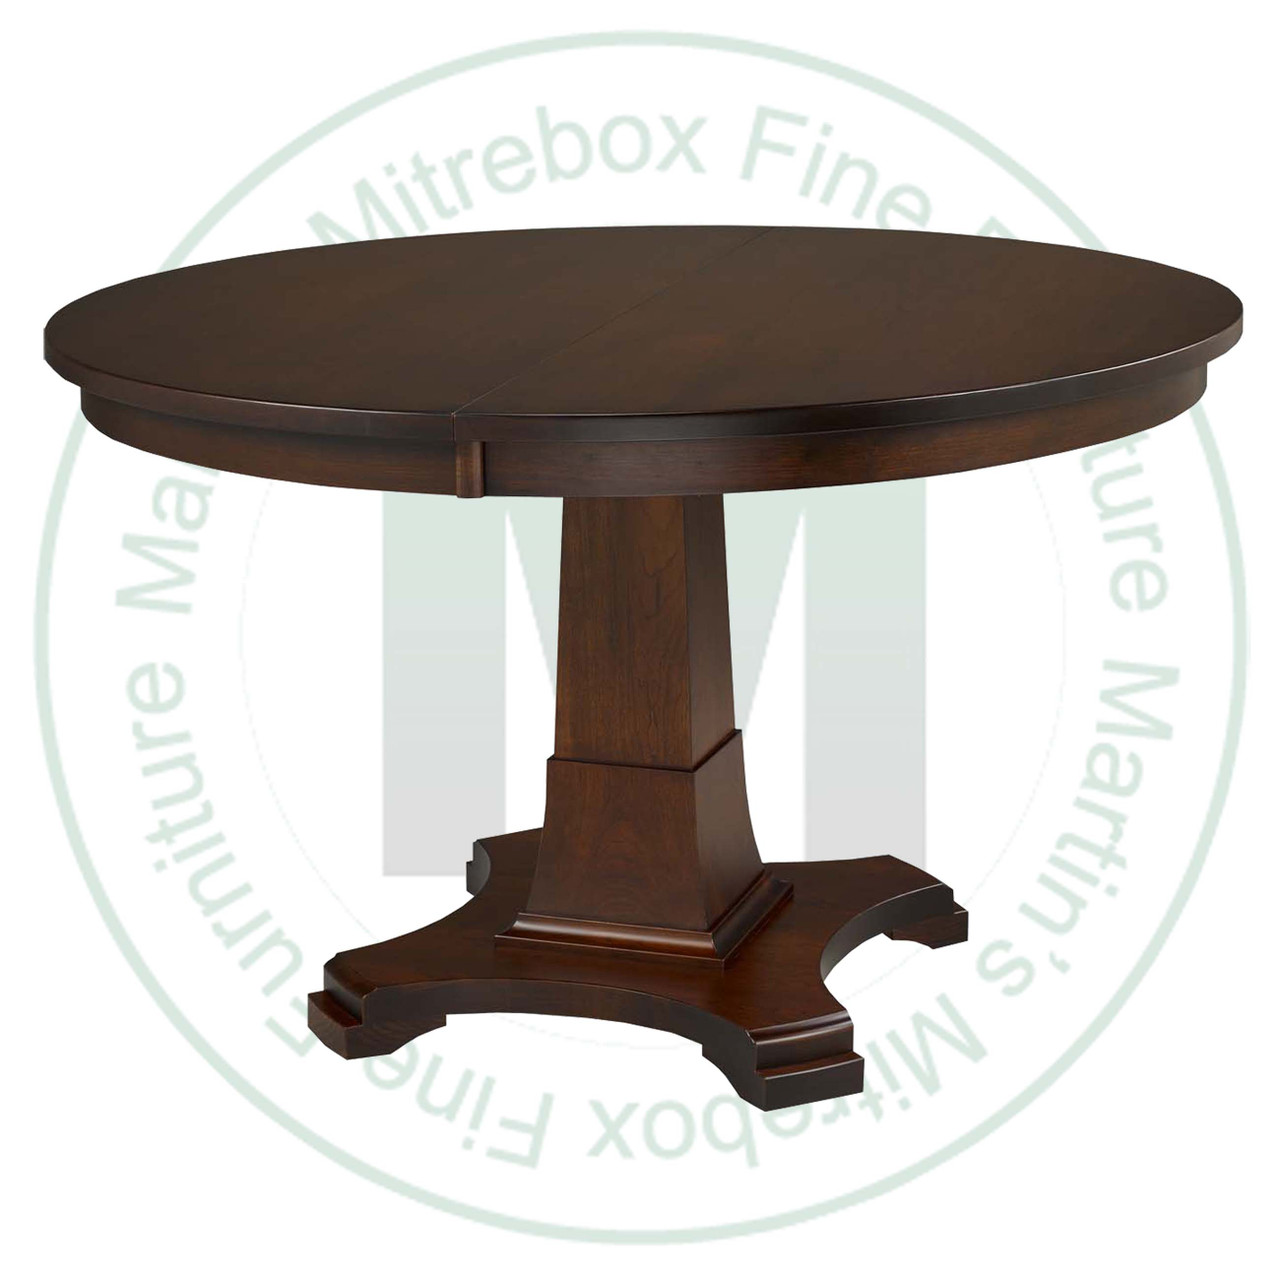 Wormy Maple Abbey Single Pedestal Table 48''D x 48''W x 30''H With 2 - 12'' Leaves. Table Has 1'' Thick Top